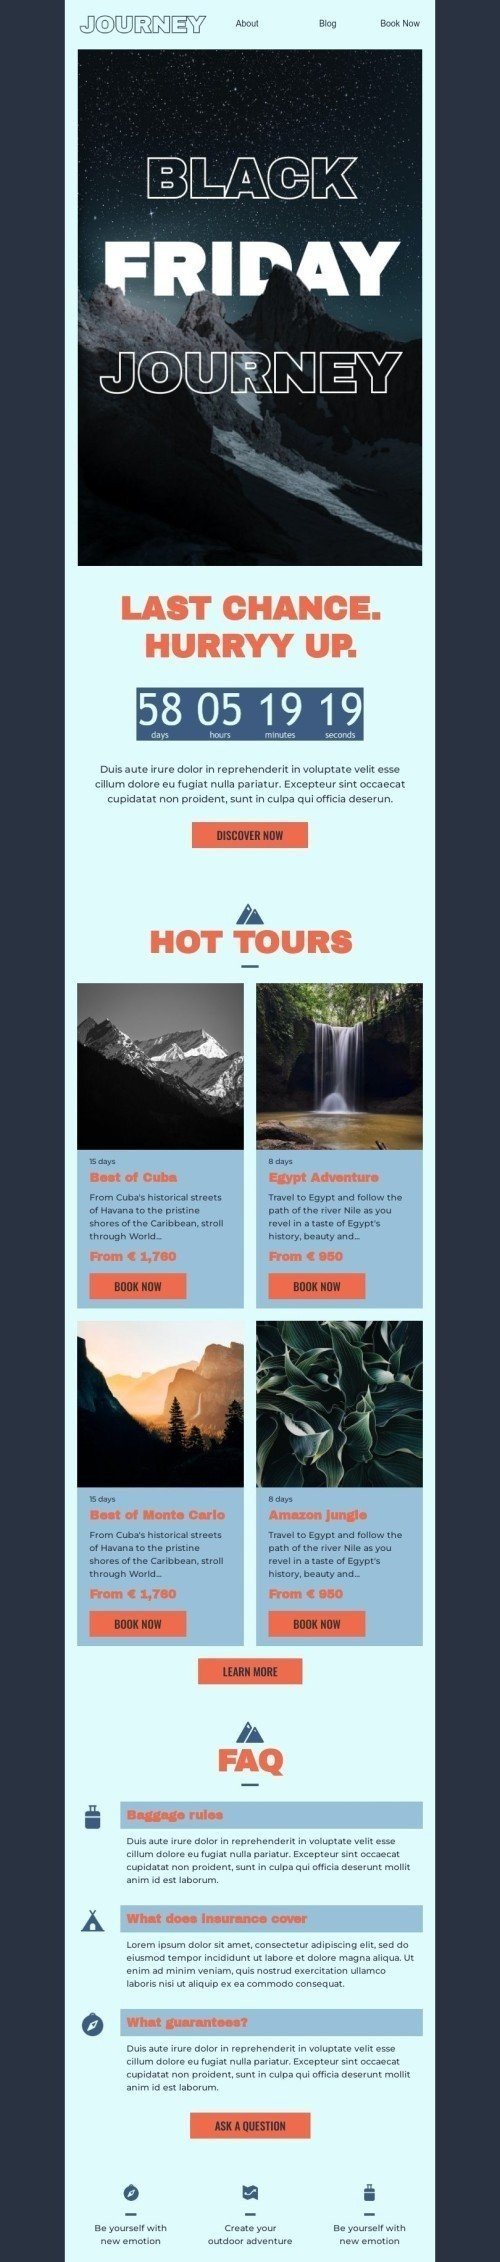 Black Friday Email Template "Black Friday journey" for Travel industry mobile view